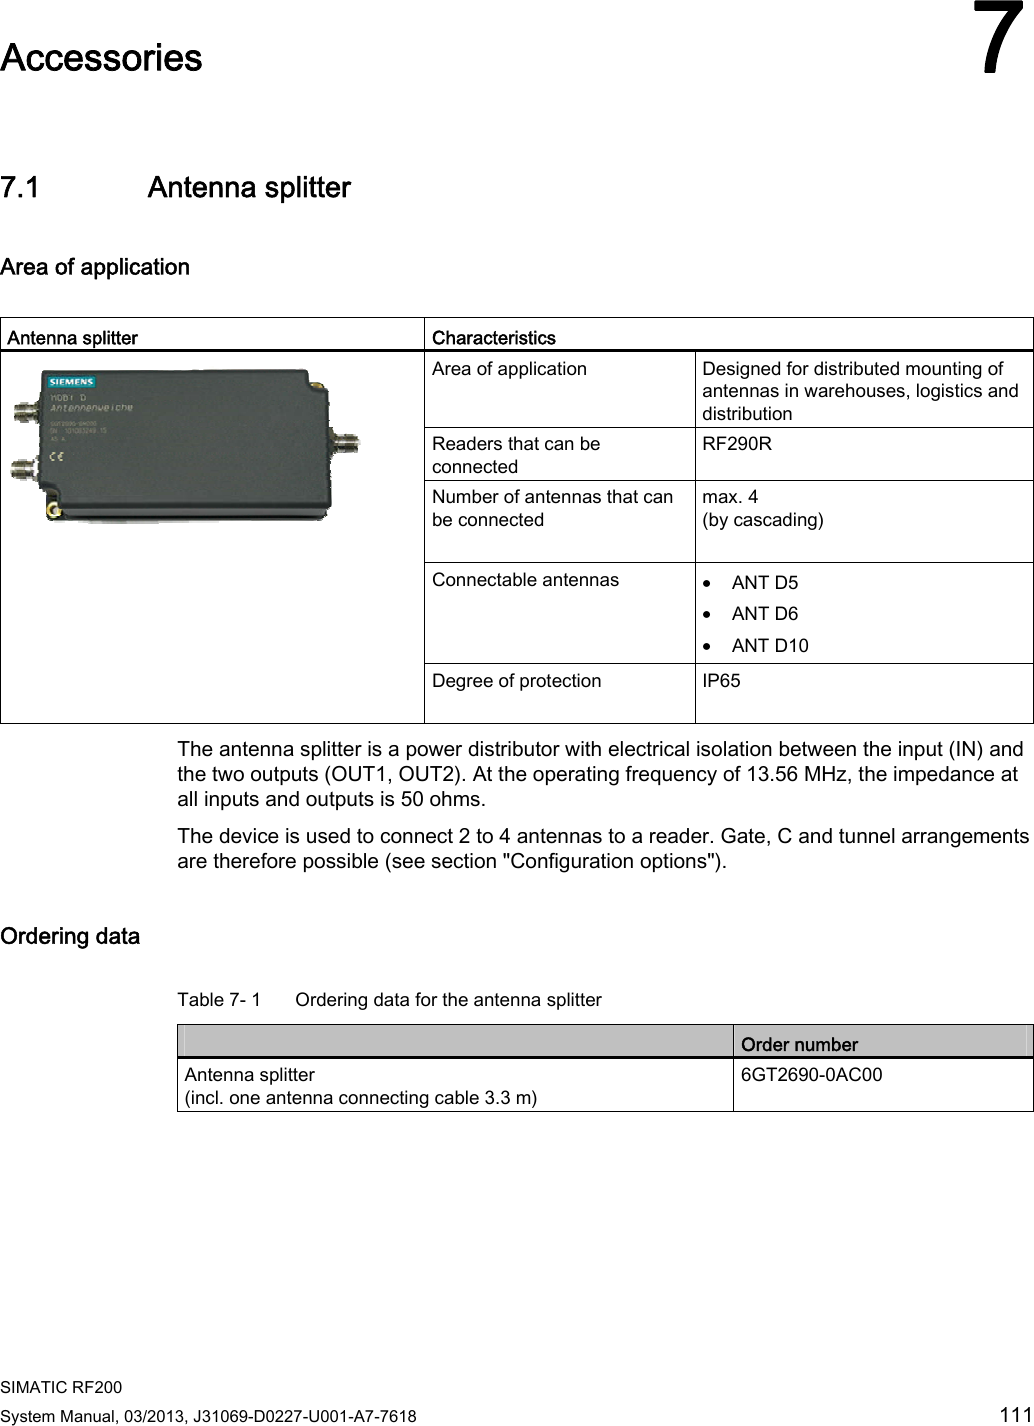  SIMATIC RF200 System Manual, 03/2013, J31069-D0227-U001-A7-7618  111 Accessories 77.1 Antenna splitter Area of application   Antenna splitter  Characteristics Area of application  Designed for distributed mounting of antennas in warehouses, logistics and distribution Readers that can be connected  RF290R Number of antennas that can be connected max. 4  (by cascading)  Connectable antennas  • ANT D5 • ANT D6 • ANT D10  Degree of protection  IP65  The antenna splitter is a power distributor with electrical isolation between the input (IN) and the two outputs (OUT1, OUT2). At the operating frequency of 13.56 MHz, the impedance at all inputs and outputs is 50 ohms.  The device is used to connect 2 to 4 antennas to a reader. Gate, C and tunnel arrangements are therefore possible (see section &quot;Configuration options&quot;). Ordering data  Table 7- 1  Ordering data for the antenna splitter  Order number Antenna splitter (incl. one antenna connecting cable 3.3 m) 6GT2690-0AC00  